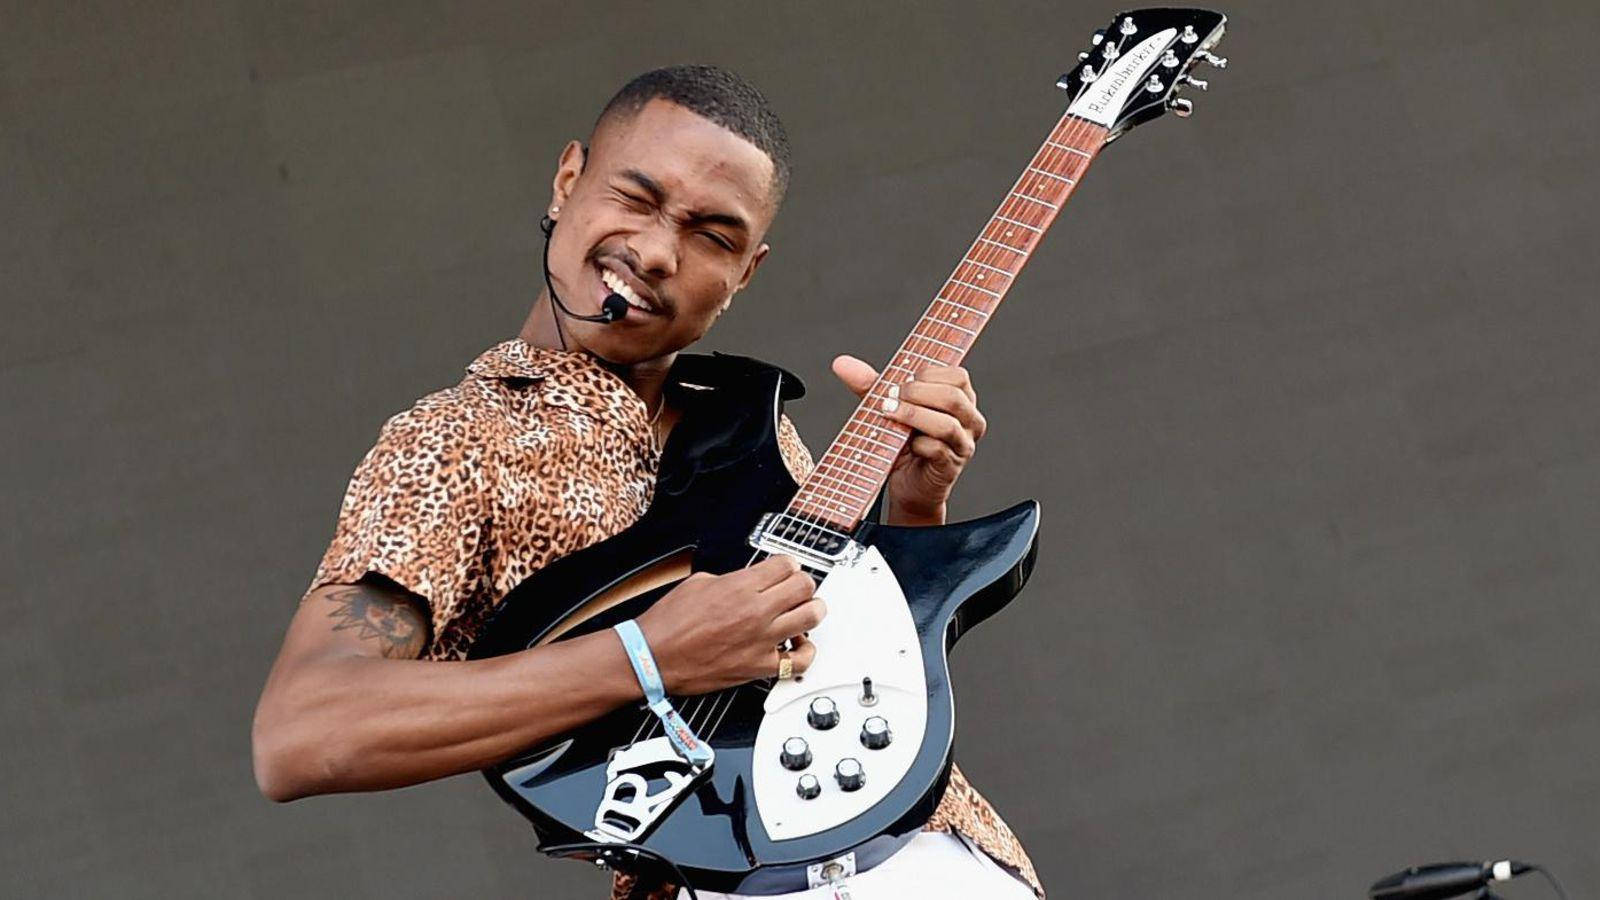 Steve Lacy Mesmerizes With Electrifying Guitar Performance Background